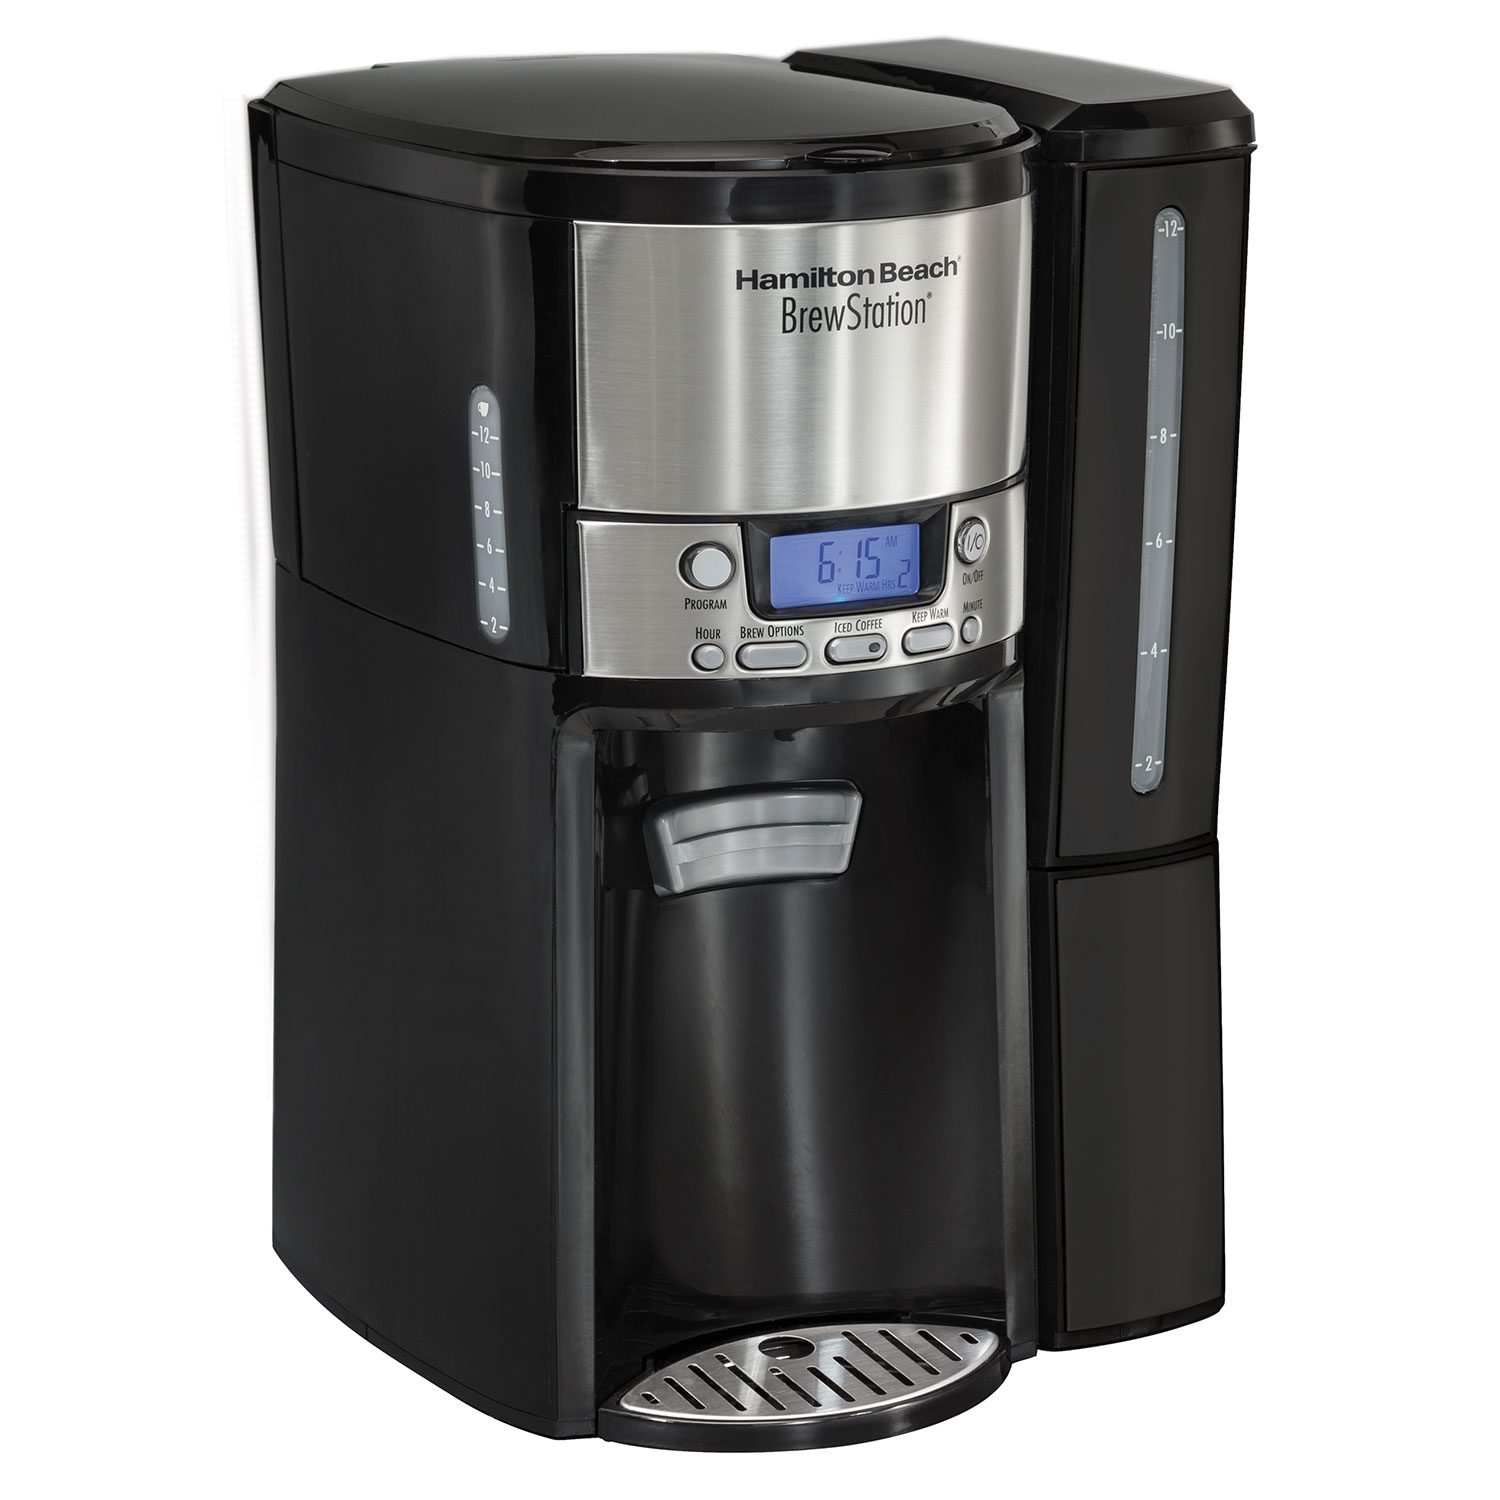 BrewStation® 12 Cup Coffee Maker with Removable Reservoir, Black & Stainless (47900G)